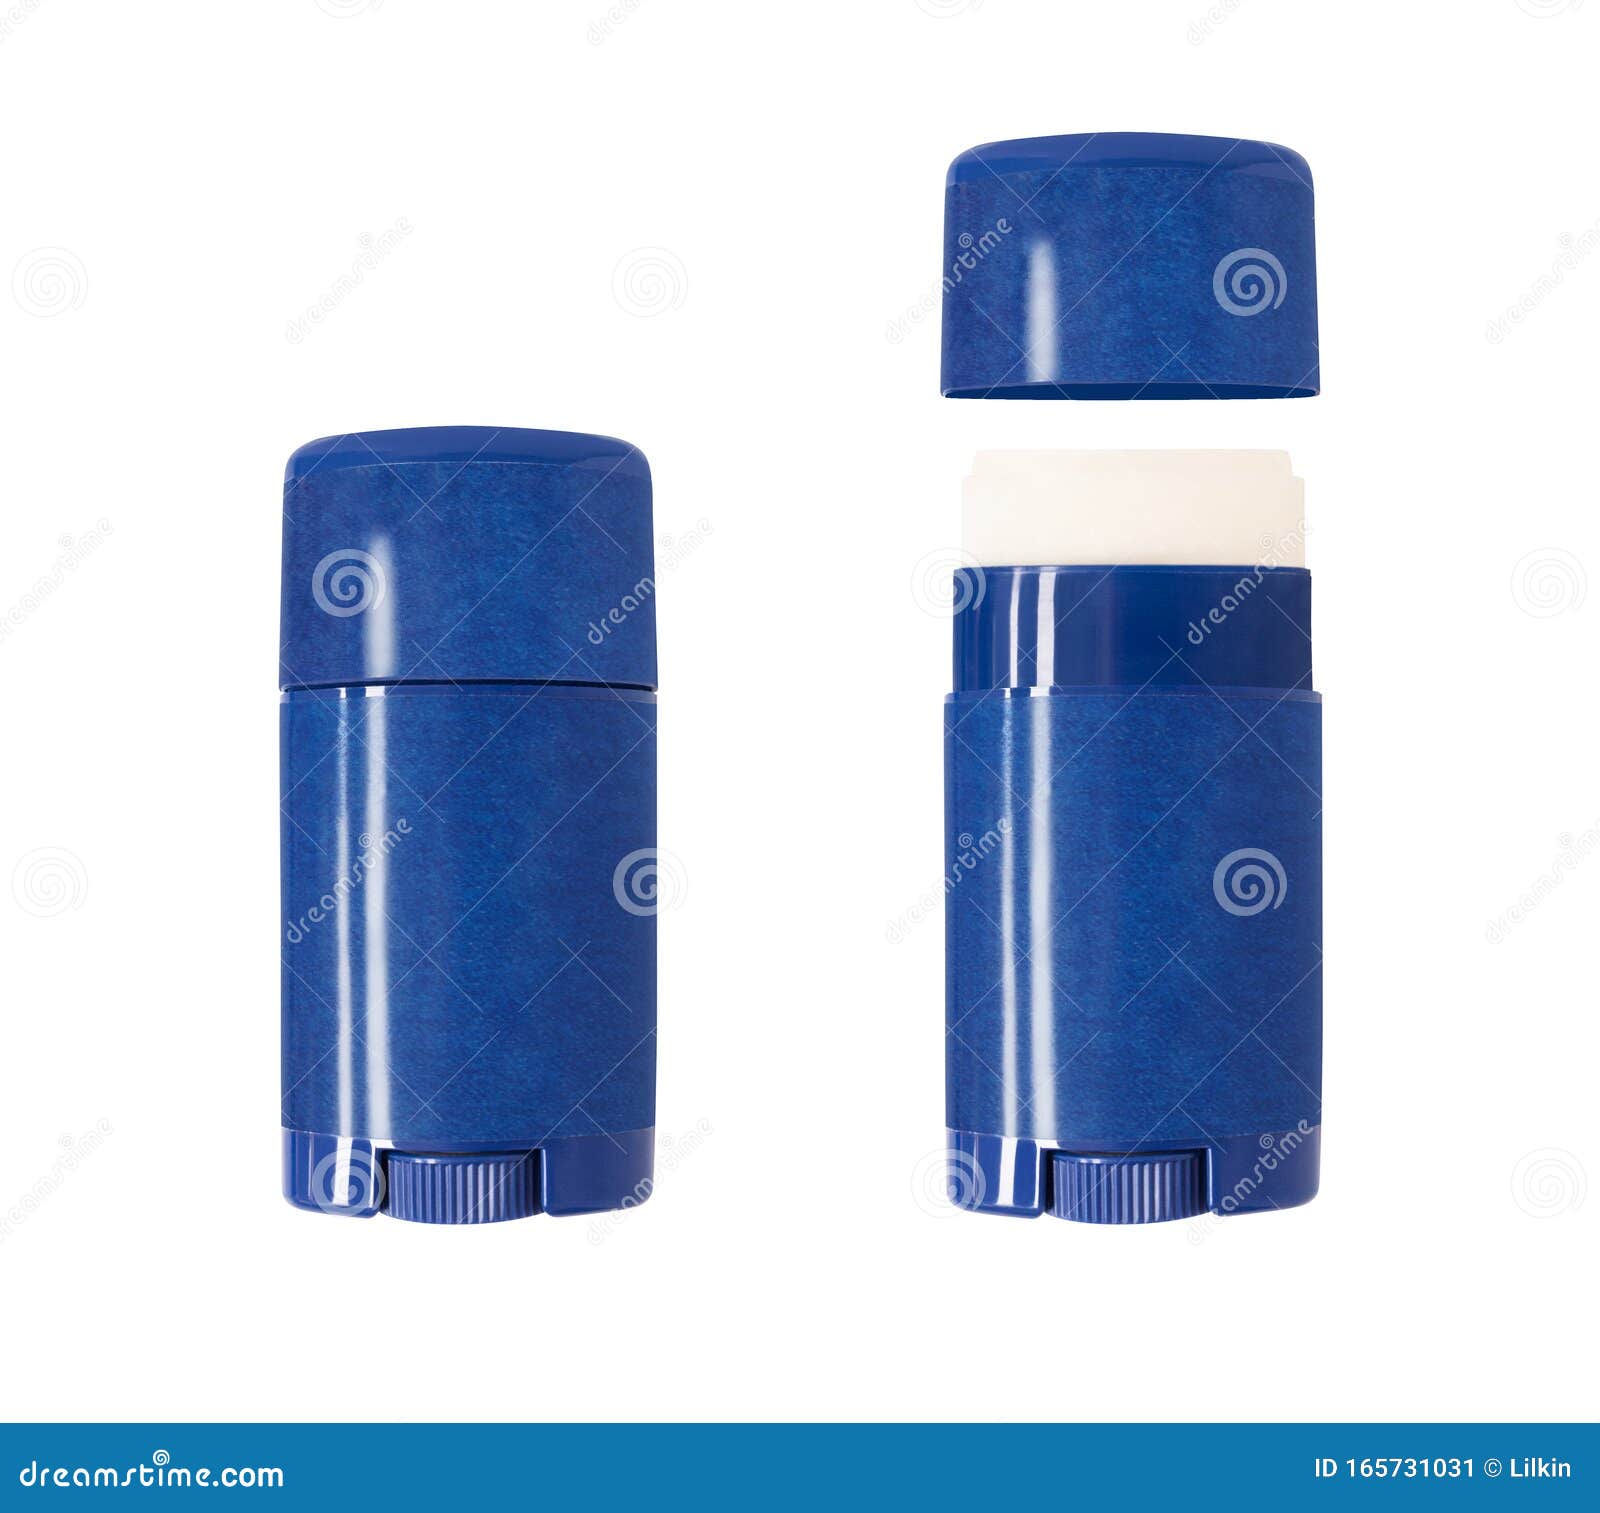 Download Mockup Of Roll On Dry Antiperspirant Deodorant Stick Stock Image Image Of Background Plastic 165731031